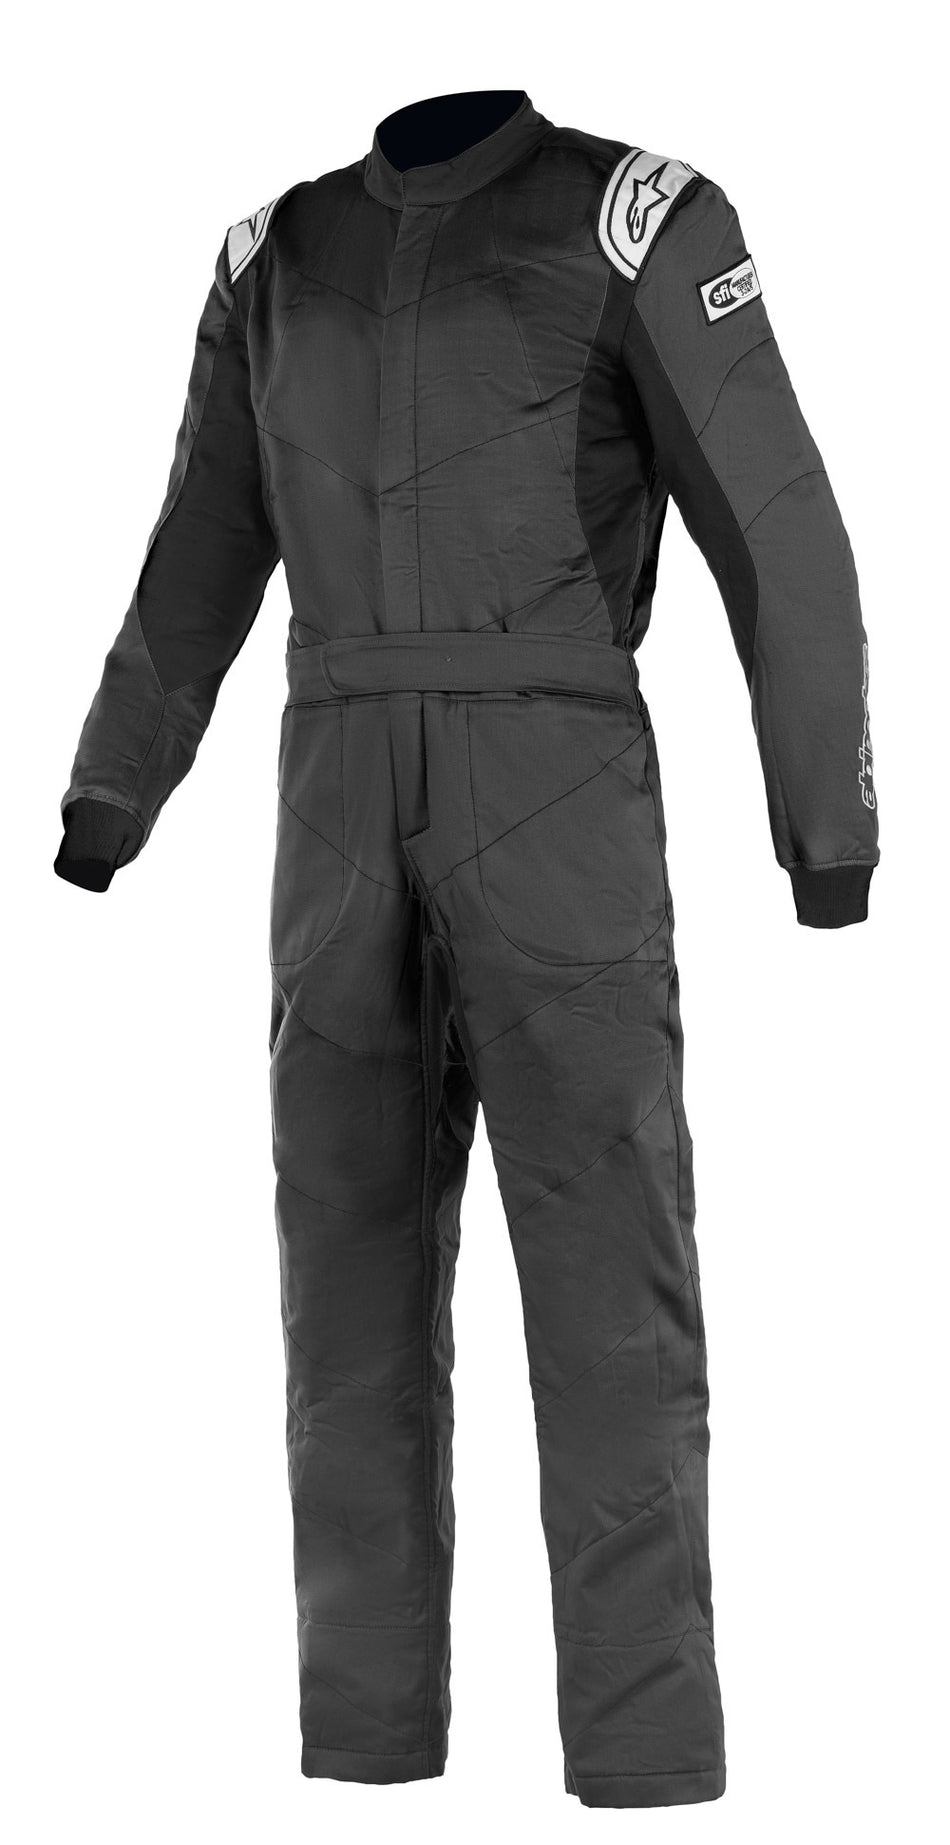 Driving Suit - Knoxville V2 - 1-Piece - SFI 3.2A/5 - Boot-Cut - Triple Layer - Fire Retardant Fabric - Black - Size 64 - 2X-Large - Each